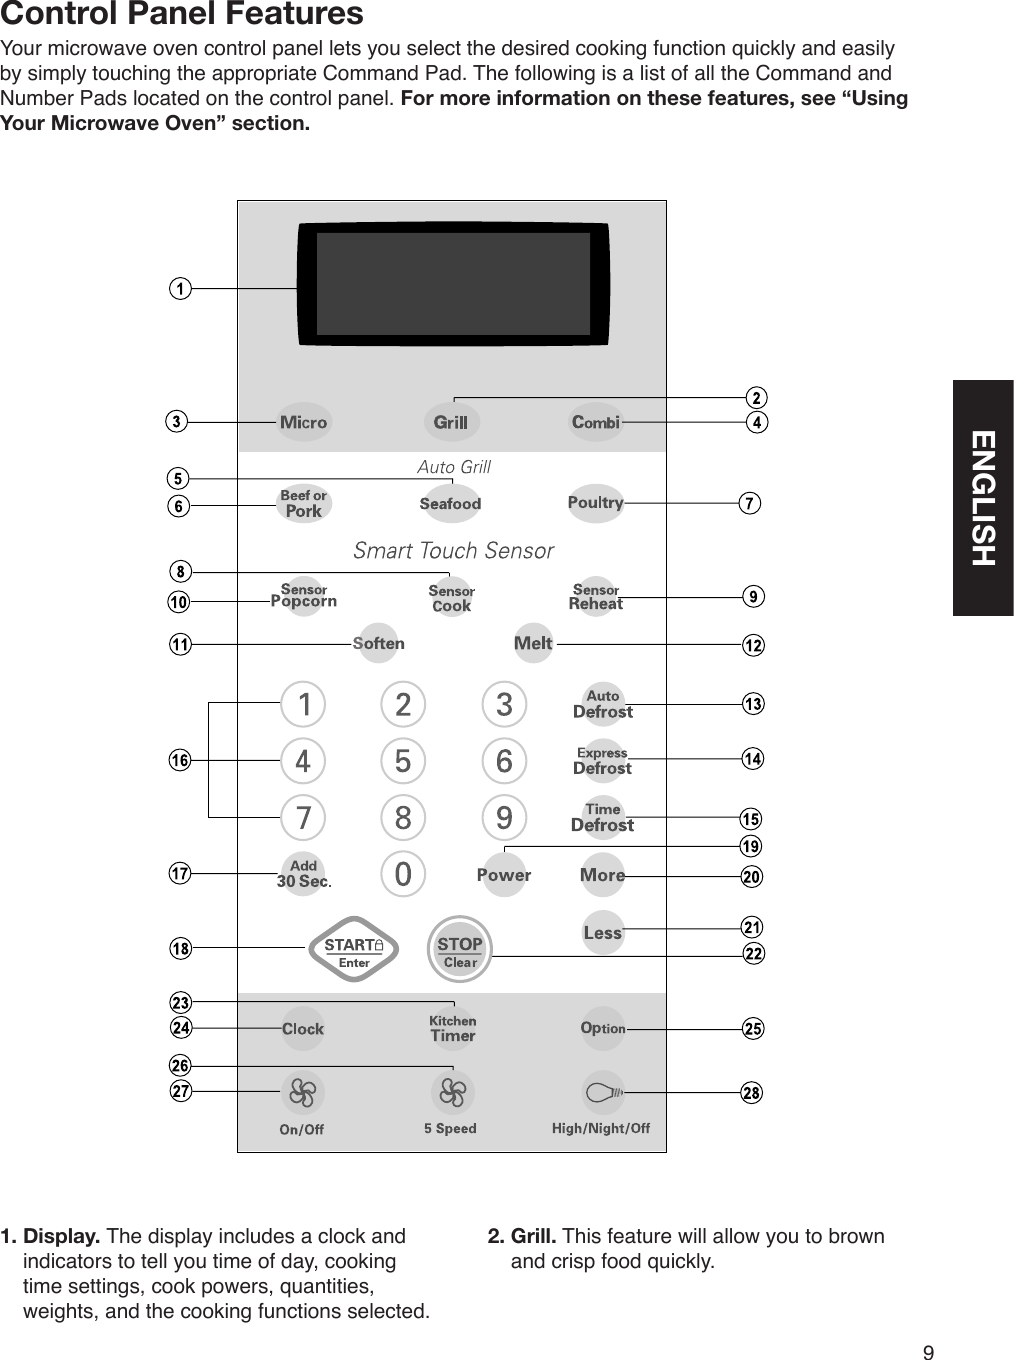 9GETTING TO KNOW YOUR MICROWAVE OVEN      Control Panel Features  Your microwave oven control panel lets you select the desired cooking function quickly and easily by simply touching the appropriate Command Pad. The following is a list of all the Command and Number Pads located on the control panel. For more information on these features, see “Using Your Microwave Oven” section.1.  Display. The display includes a clock and indicators to tell you time of day, cooking time settings, cook powers, quantities, weights, and the cooking functions selected. 2.  Grill. This feature will allow you to brown and crisp food quickly.ENGLISH